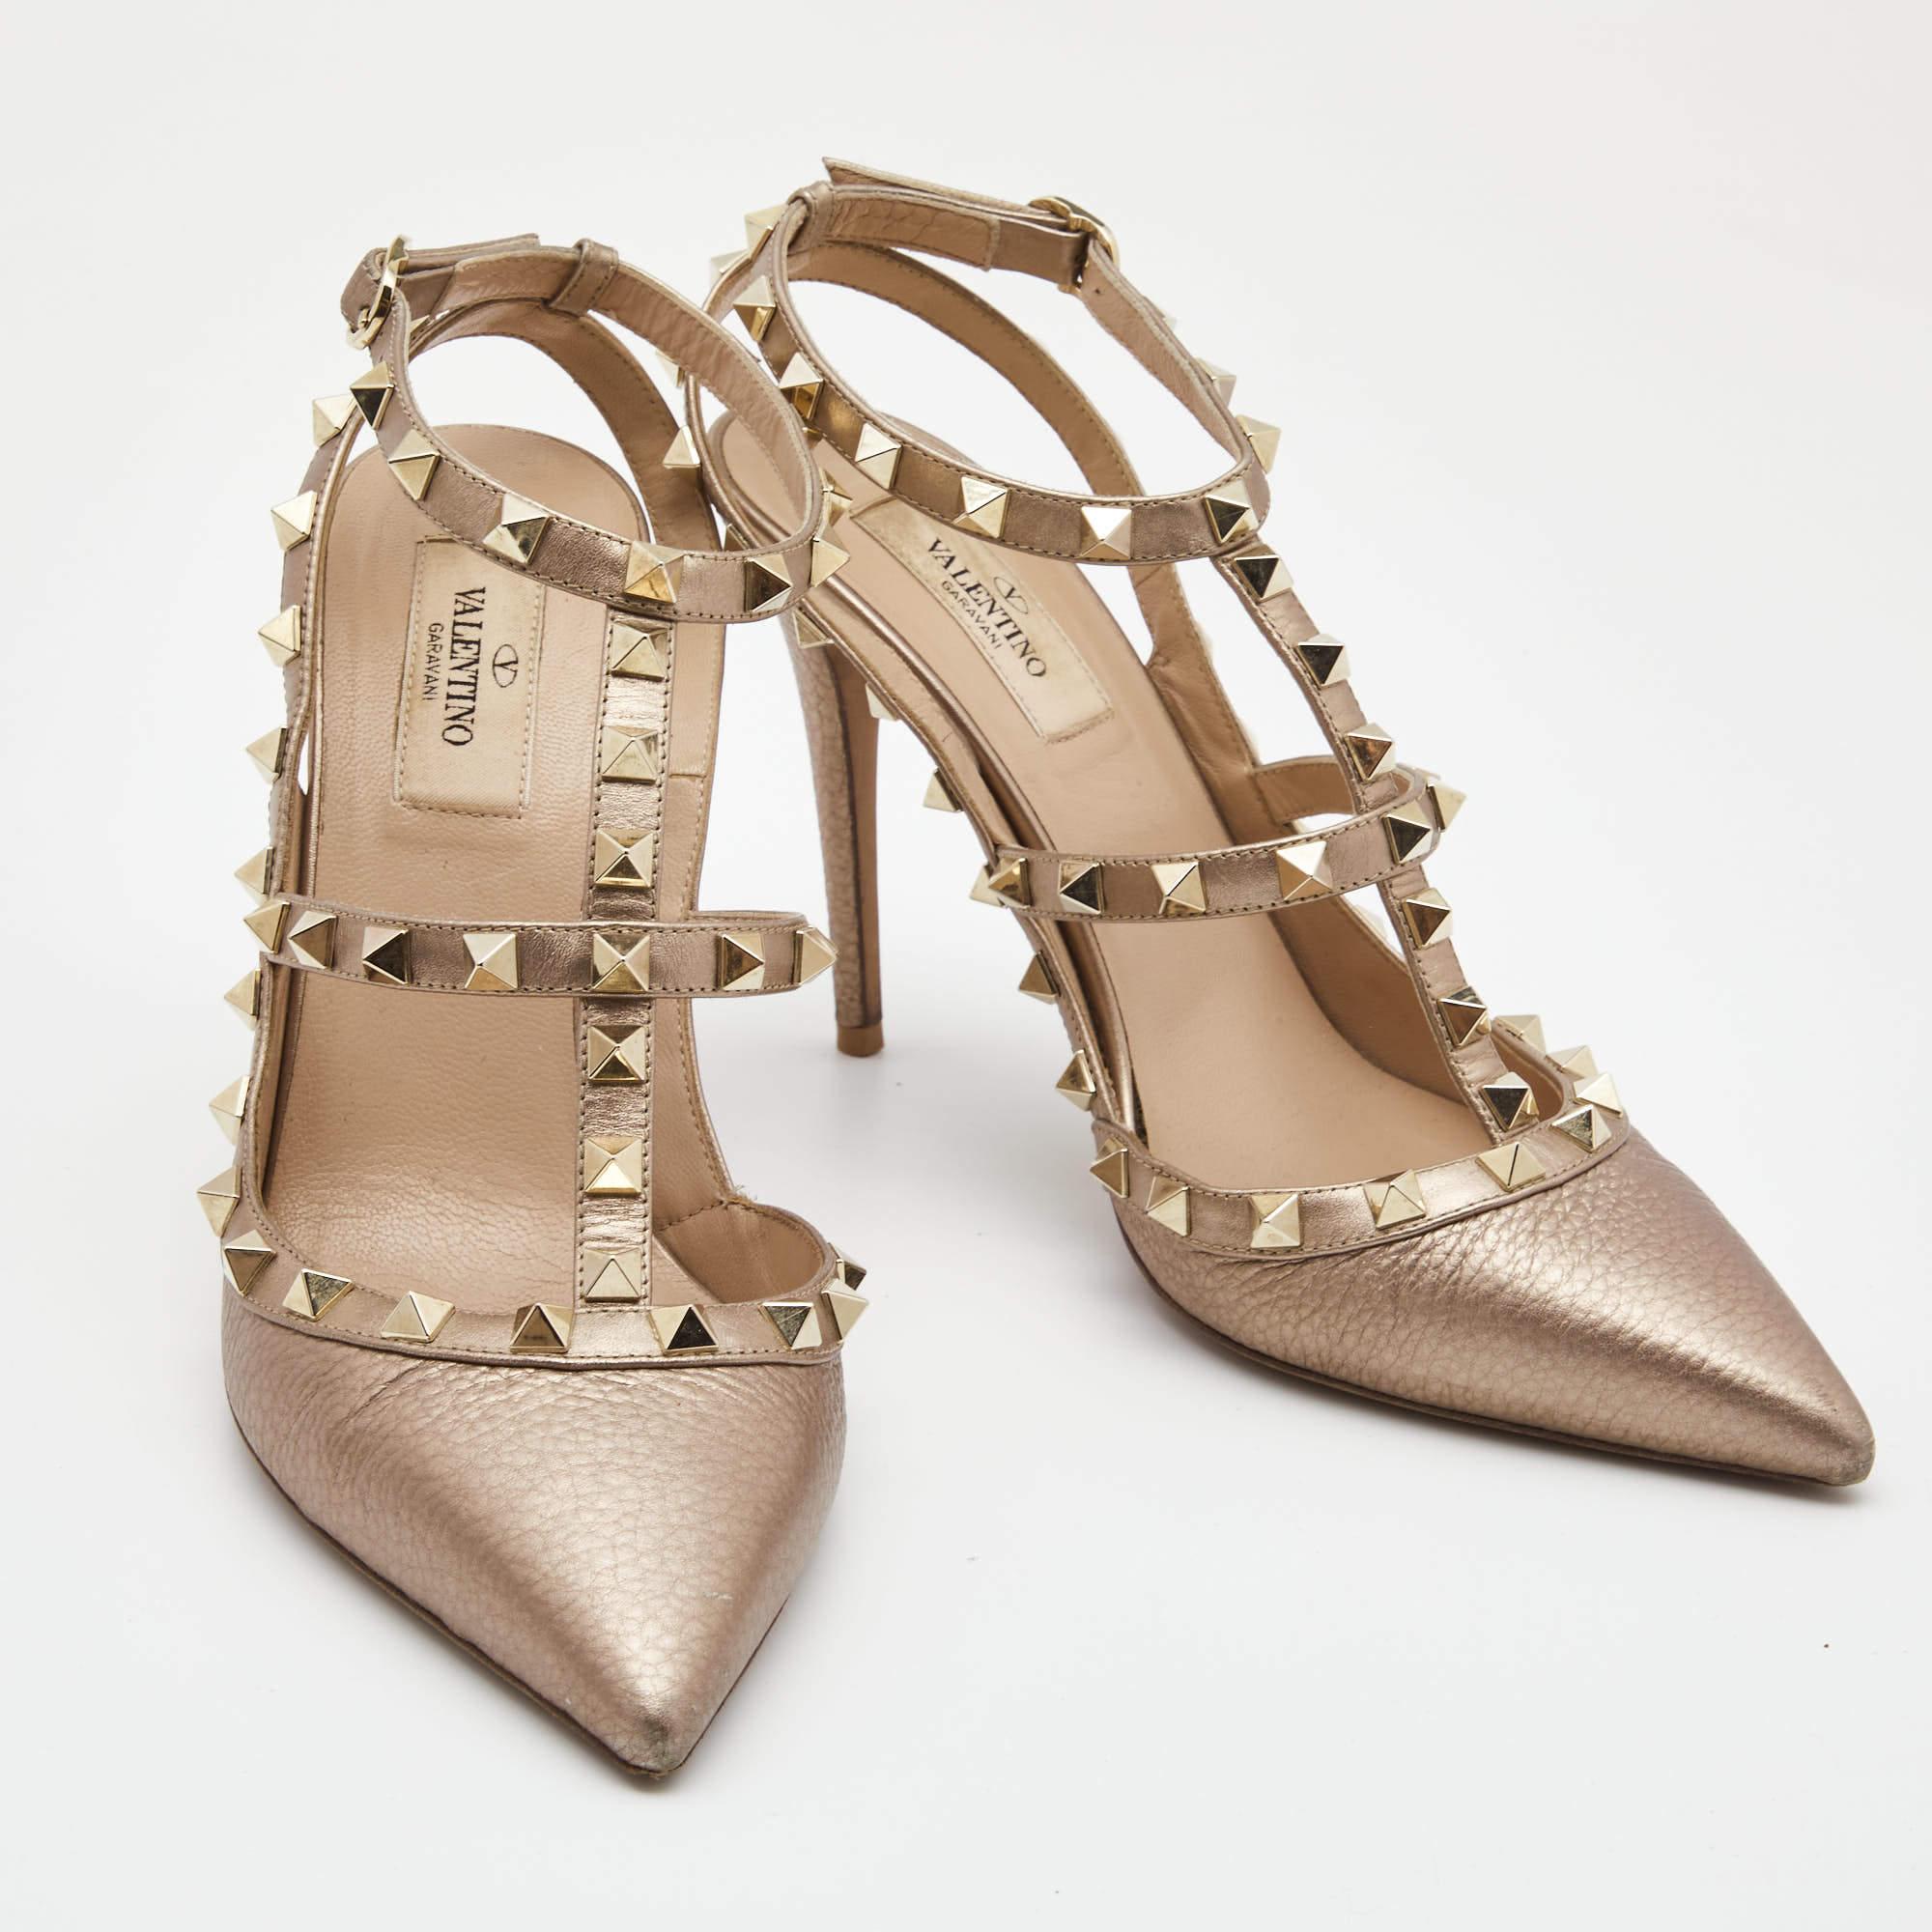 Valentino Metallic Leather Rockstud Strappy Pointed Toe Pumps Size 39 2